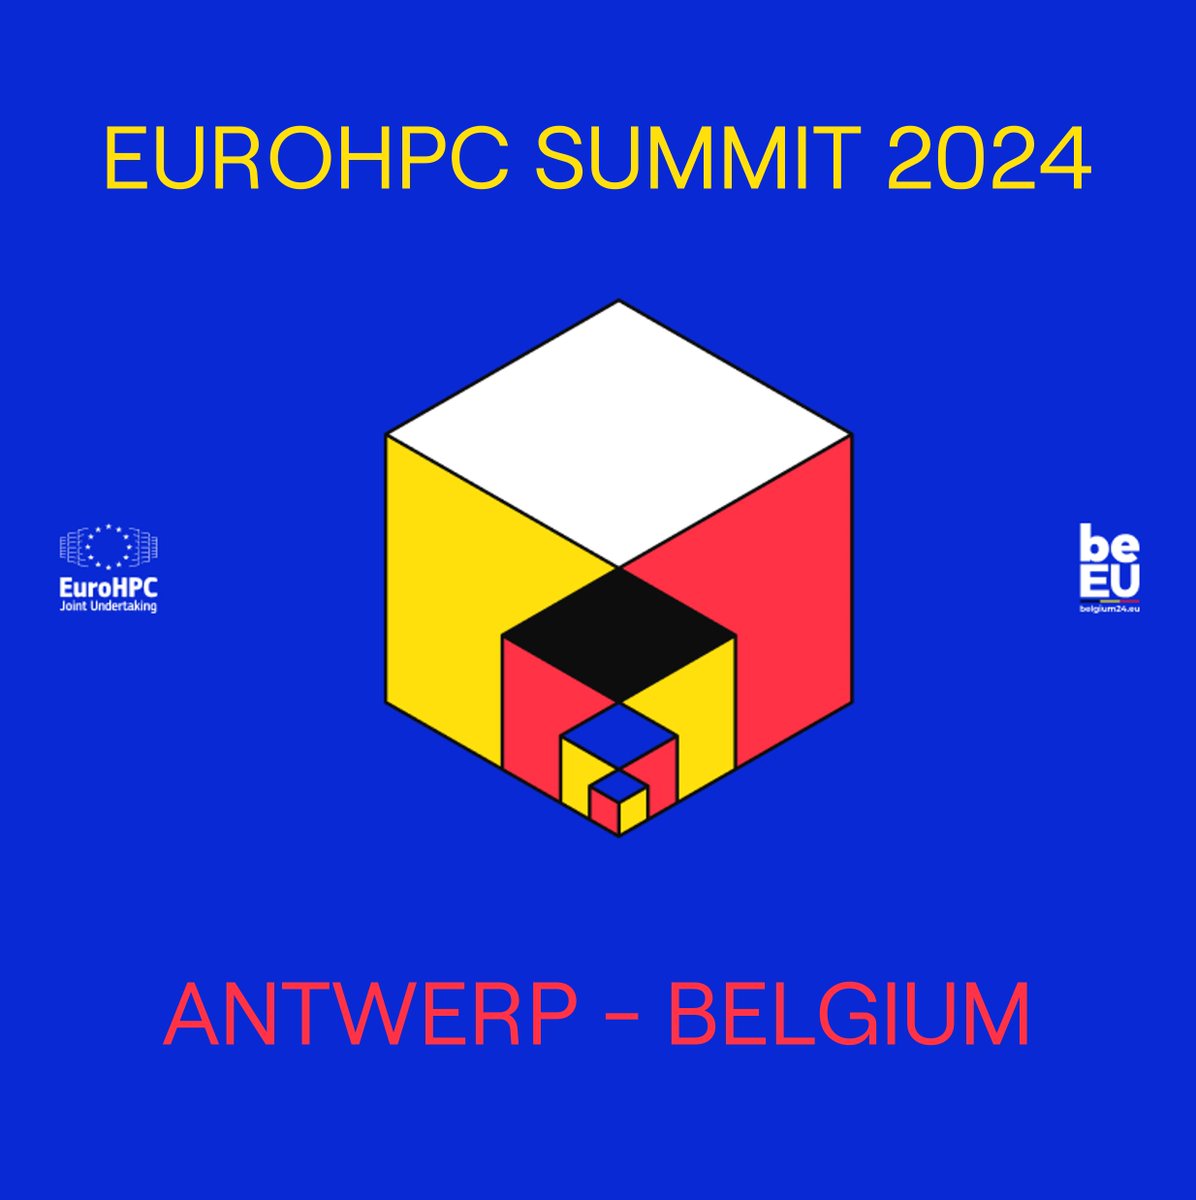 📢 The #EuroHPCsummit2024 is approaching!! 👥👥 Meet our #MultiXscale experts there! 📌 See you soon in Antwerp, Belgium! More info in our post: multixscale.eu/2023/03/13/ees… @EuroHPC_JU #EuroHPCsummit #HPC #Quantum #AI